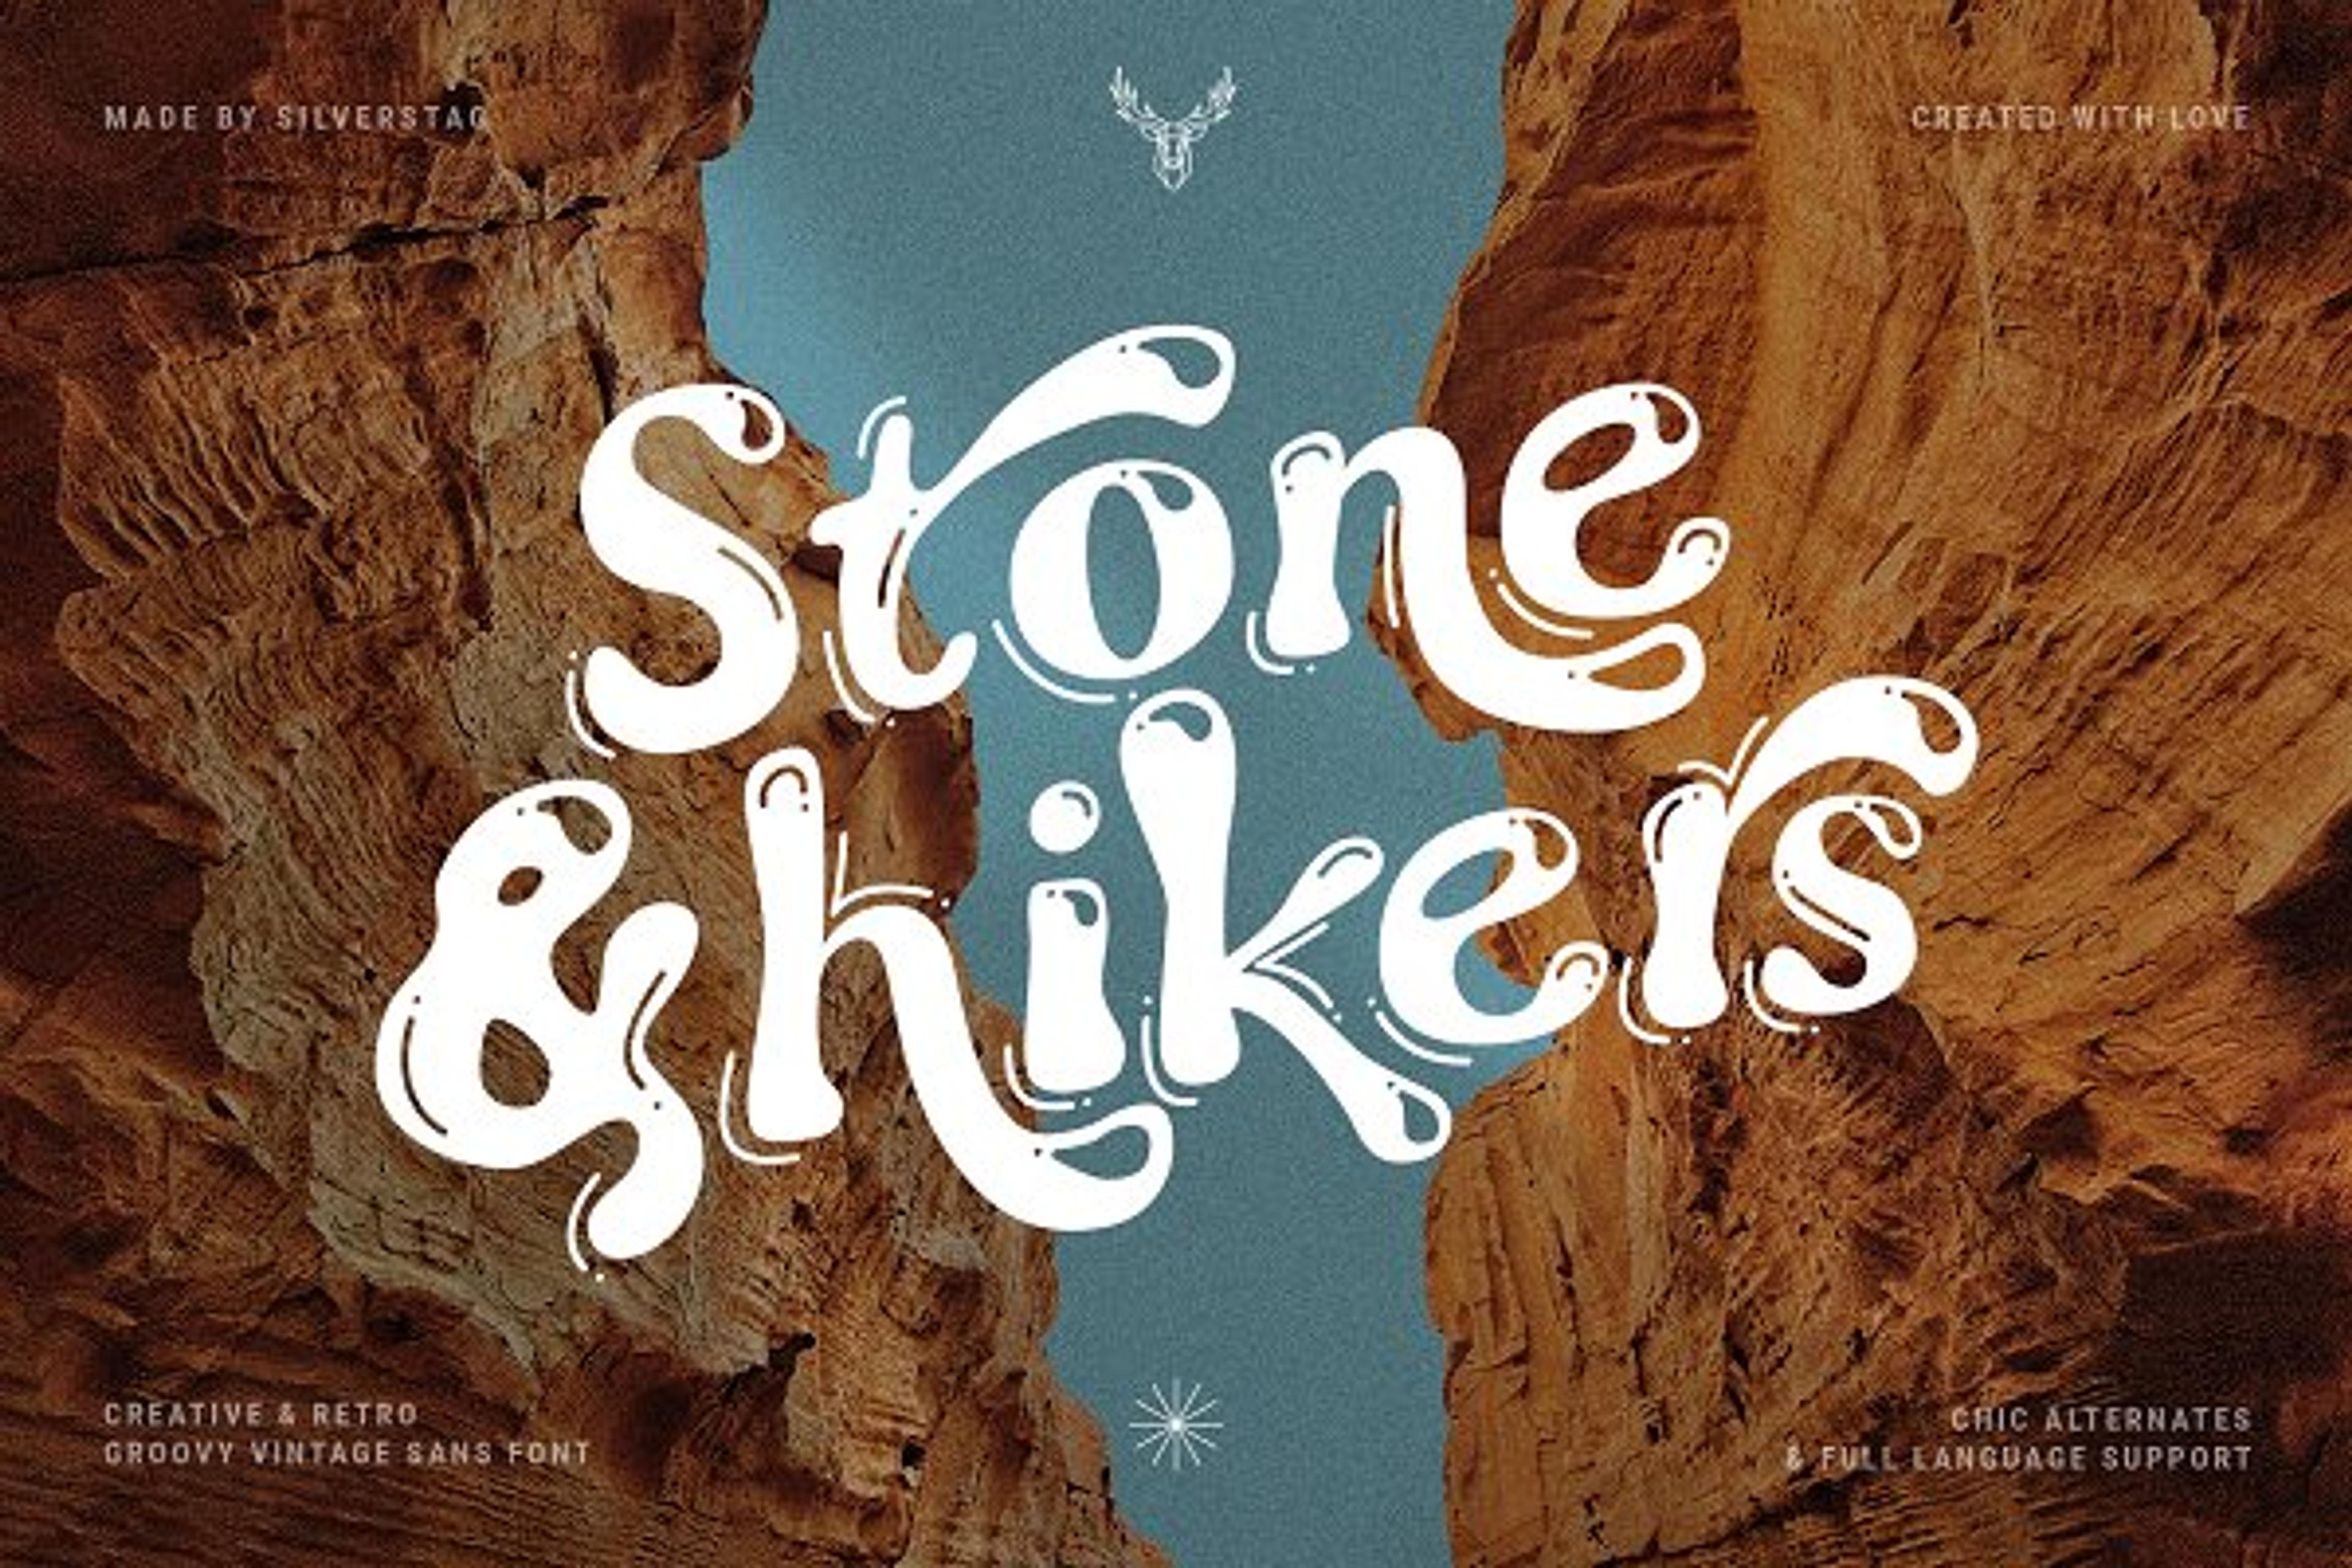 Stone & hikers - Groovy Retro Font | Display Fonts ~ Creative Market